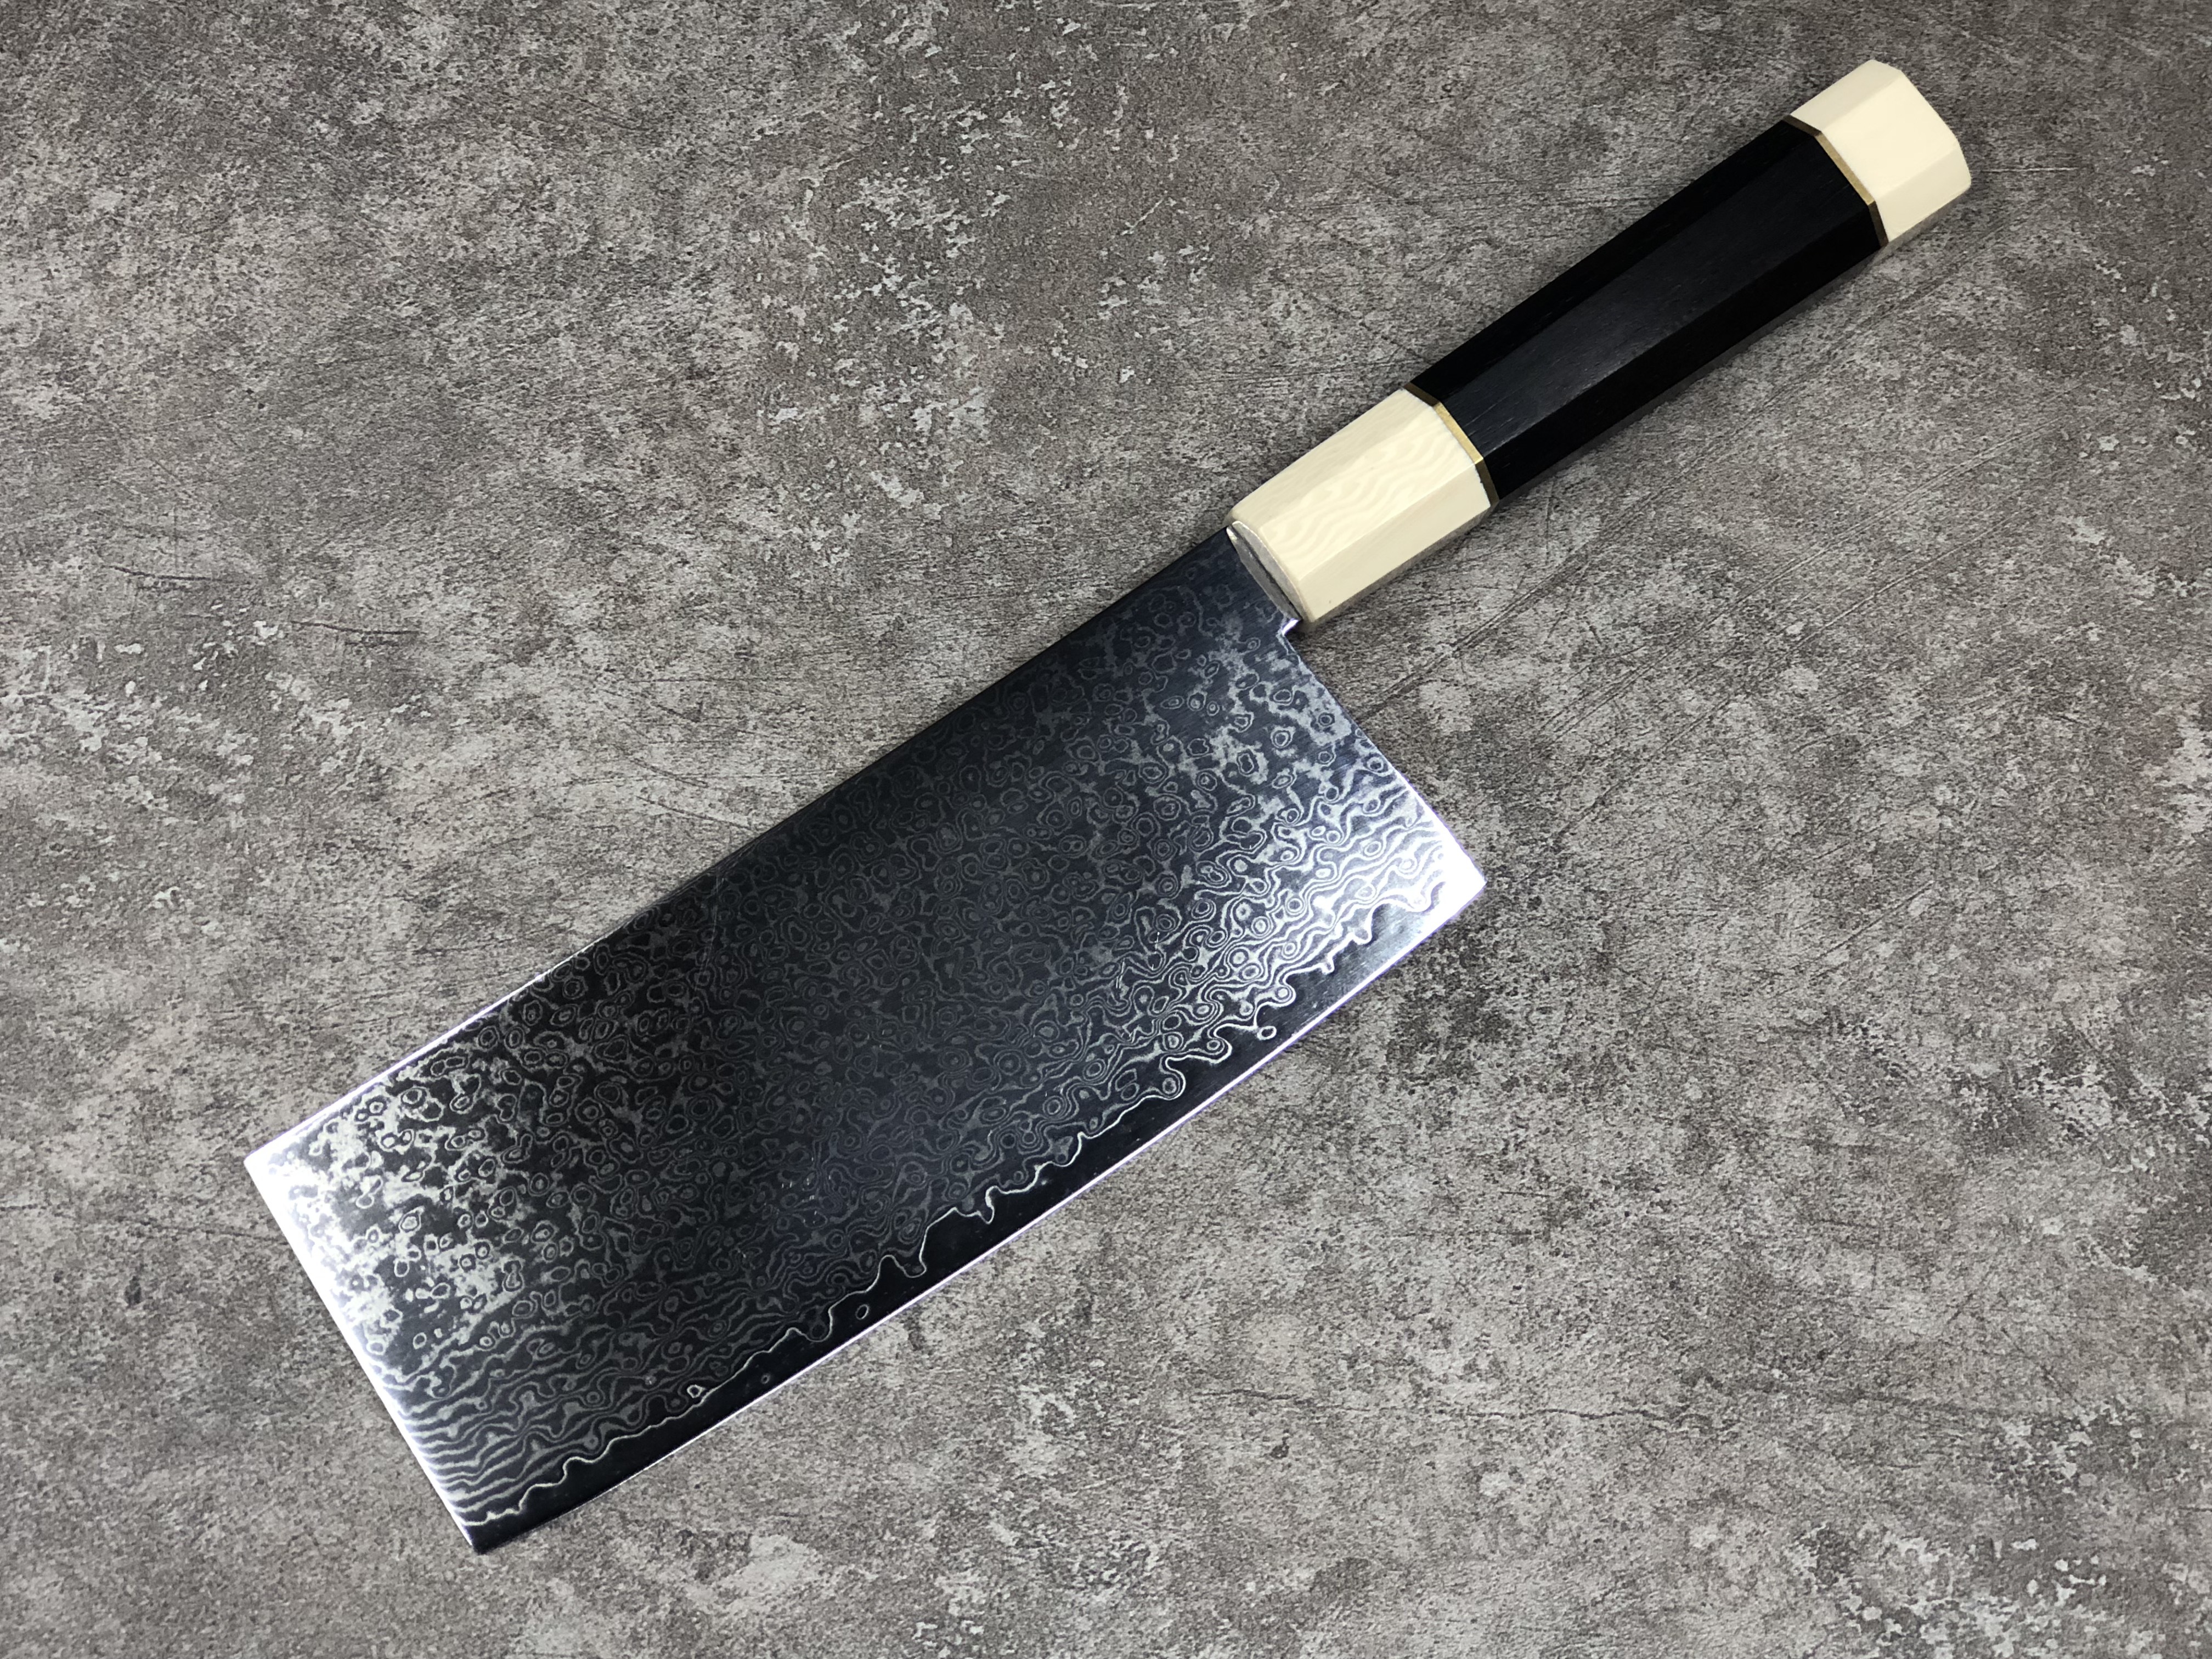 8 Inch VG10 Damascus Steel Nakiri Knife Ebony Handle Japanese Chef Knife Chinese Cleaver Cooking Knives Kitchen Cutlery